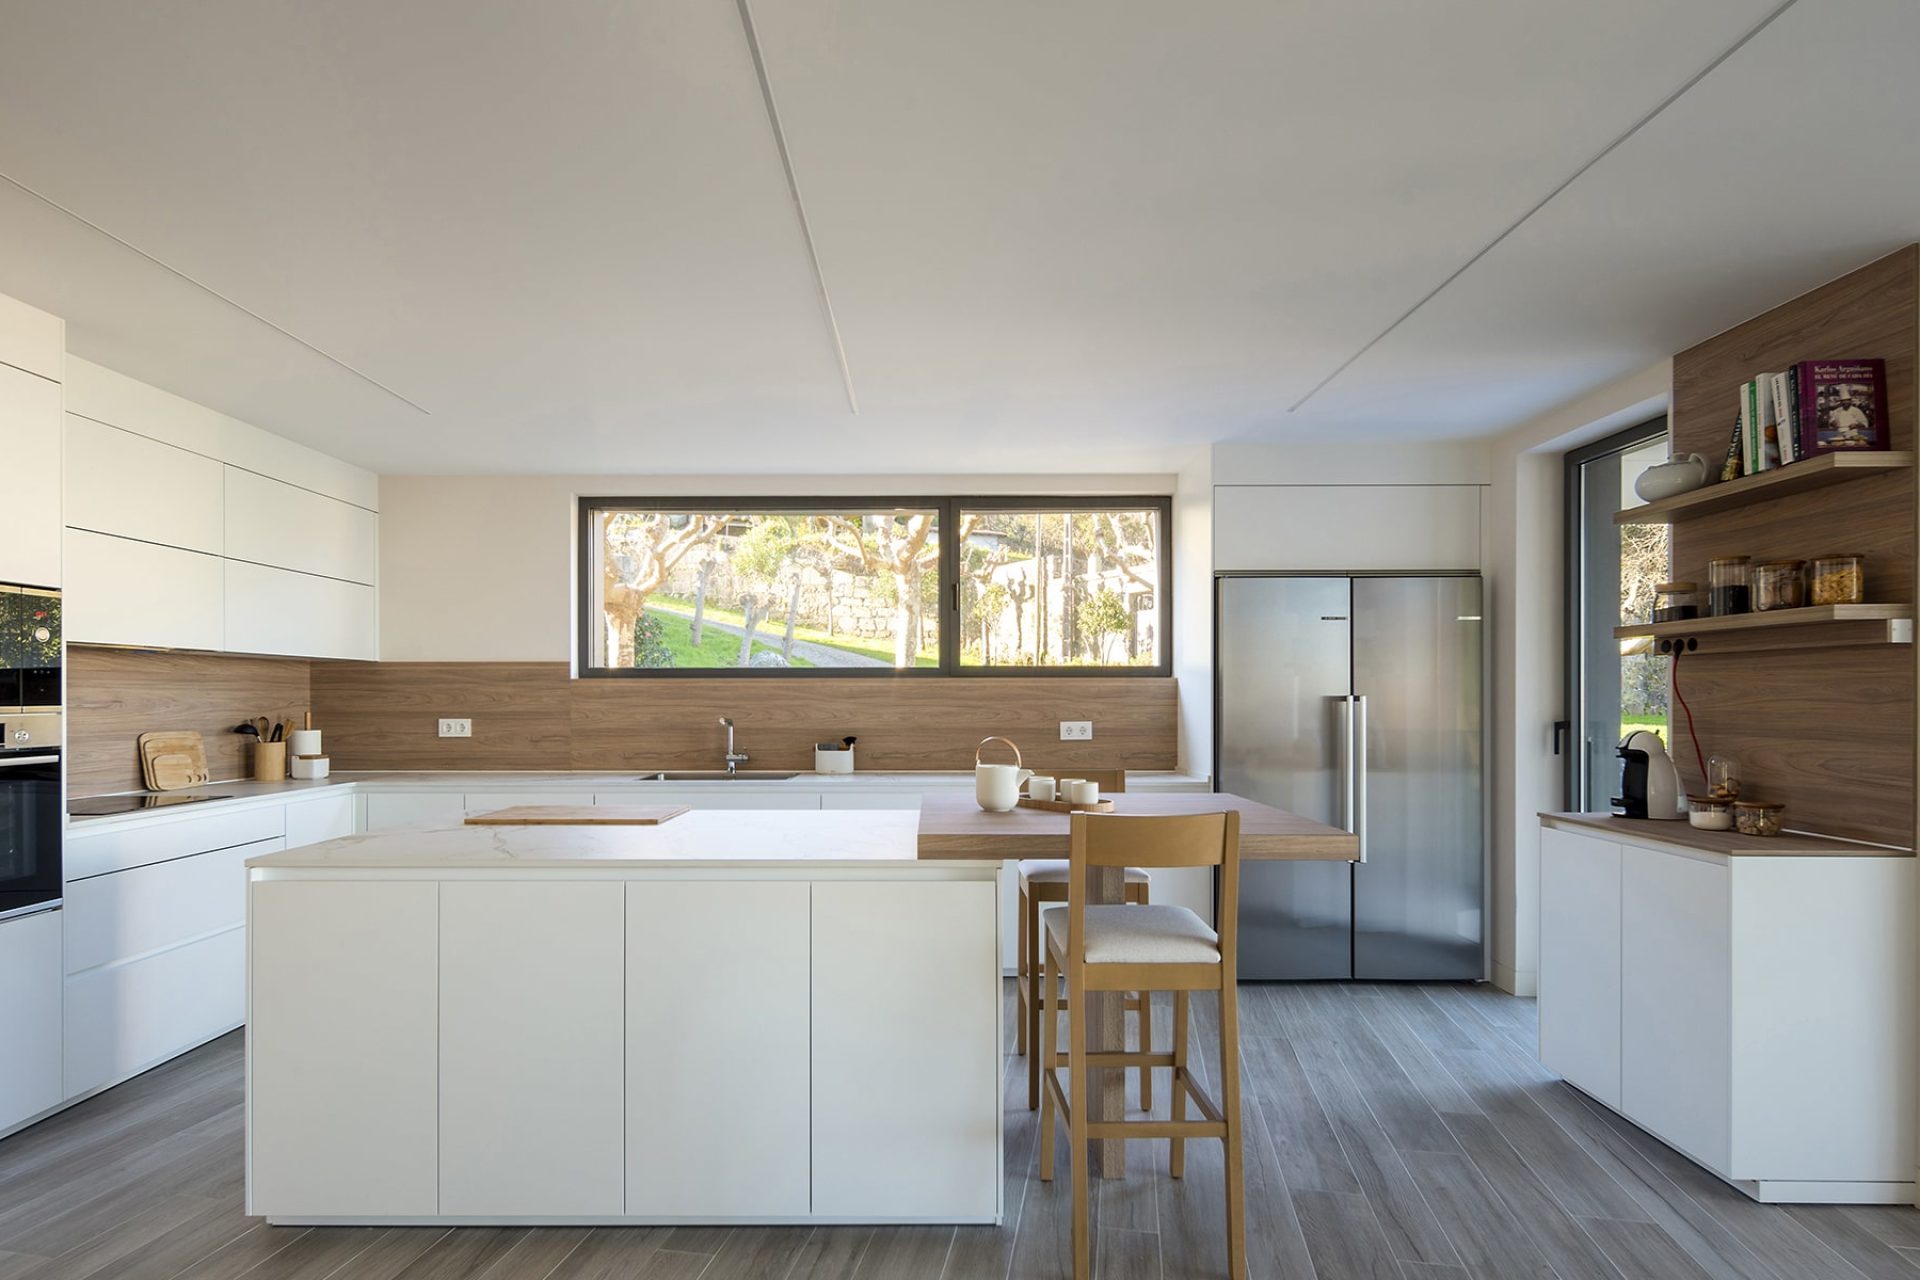 Kitchen design inspiration with white facades and wooden backboard, central island and sideboard